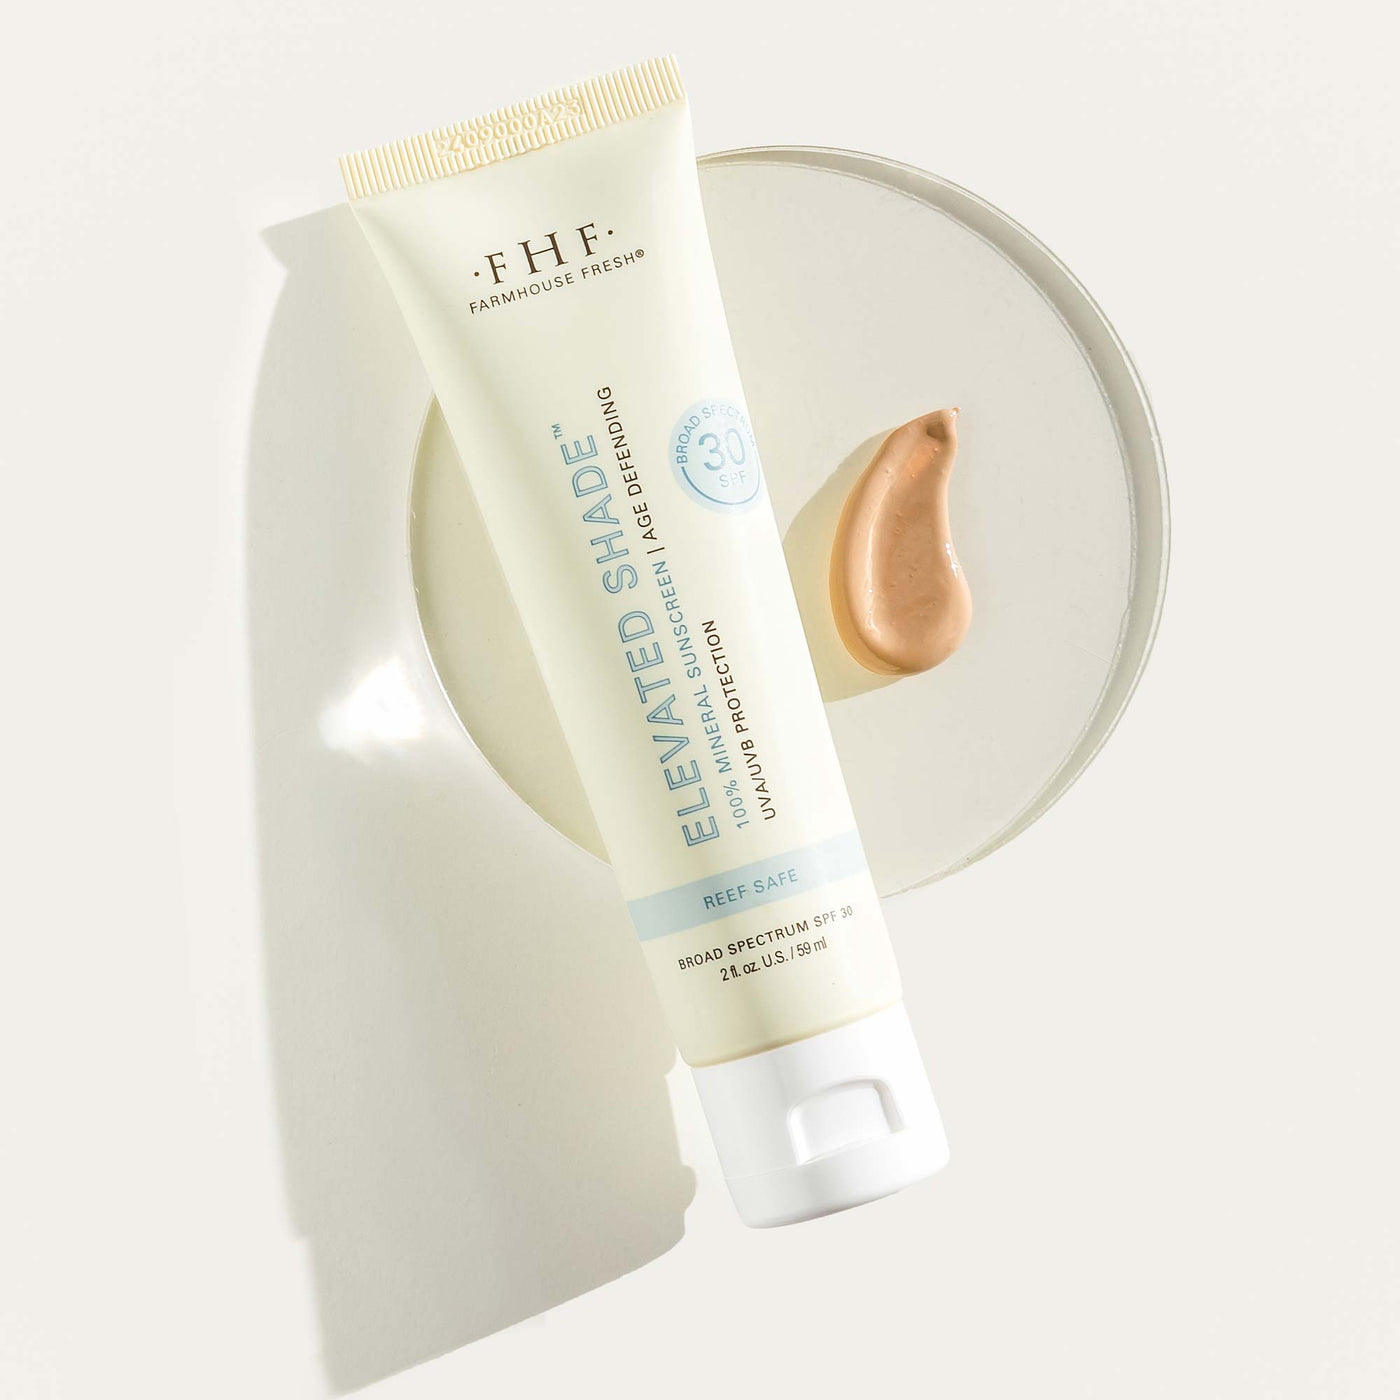 Elevated Shade® Age Defending 100% Mineral Sunscreen SPF 30